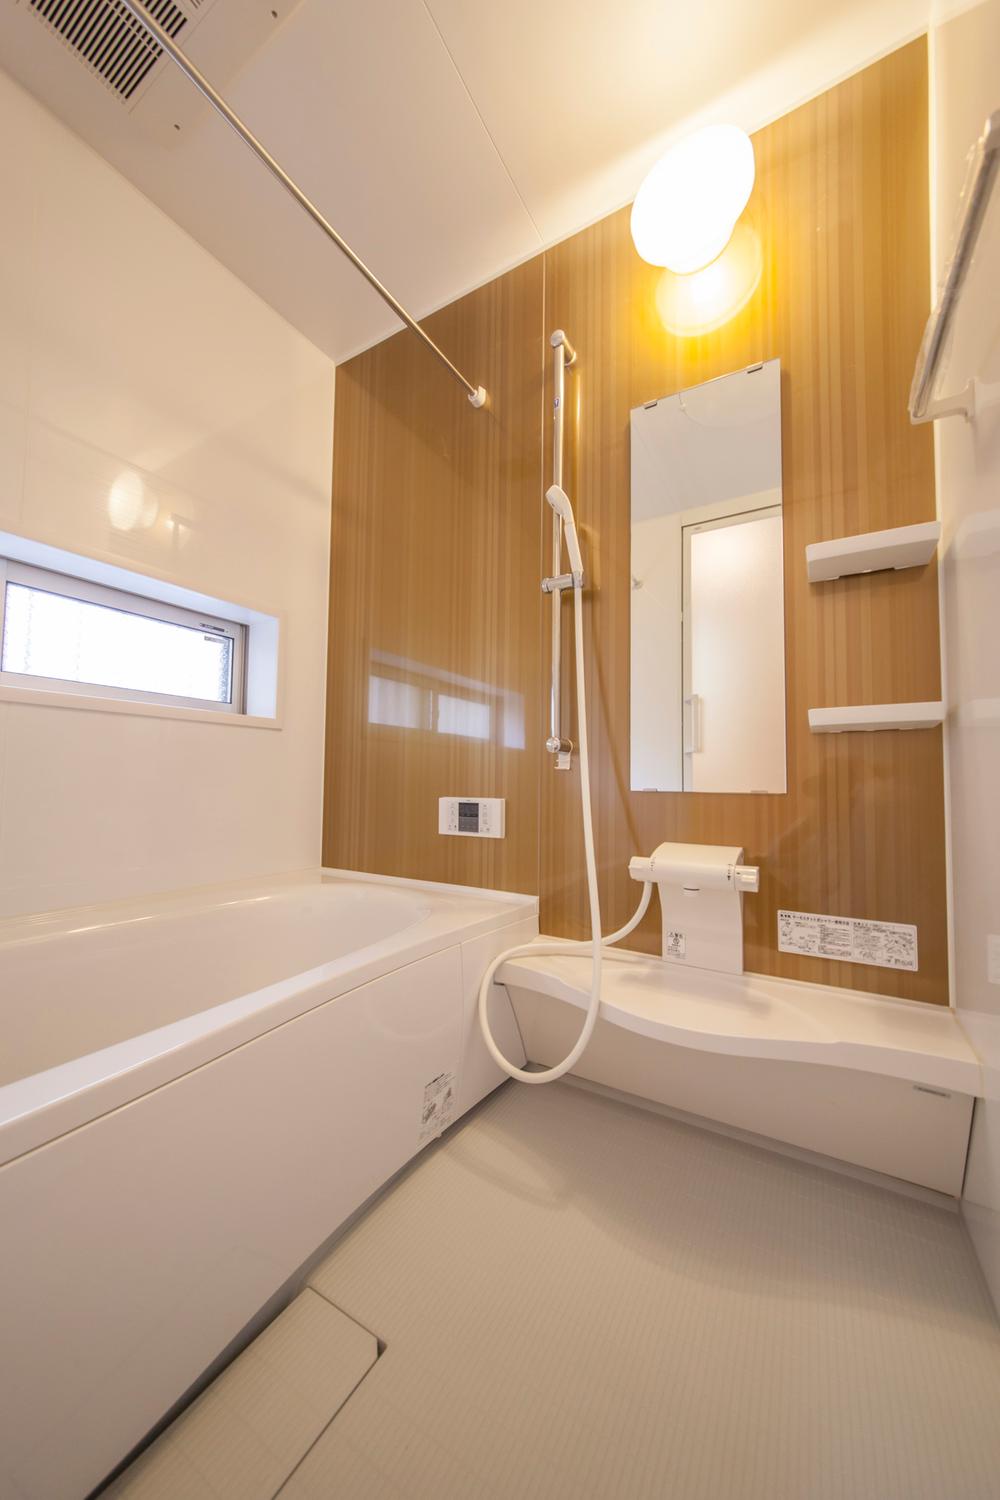 Same specifications photo (bathroom). Example of construction With Air Heating dryer ☆